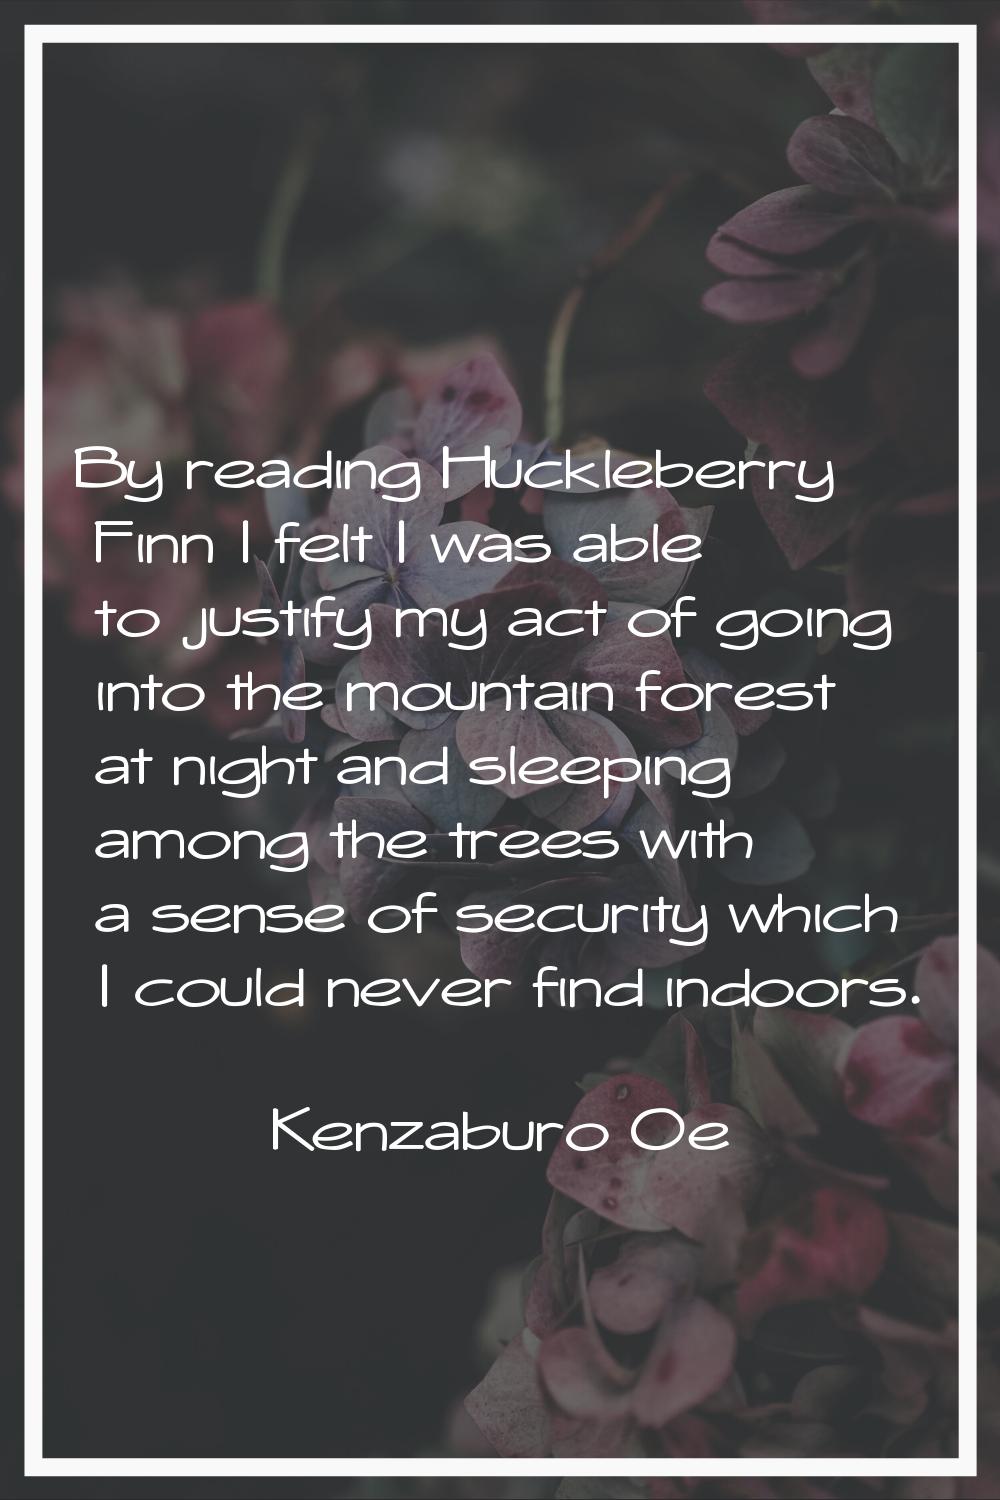 By reading Huckleberry Finn I felt I was able to justify my act of going into the mountain forest a